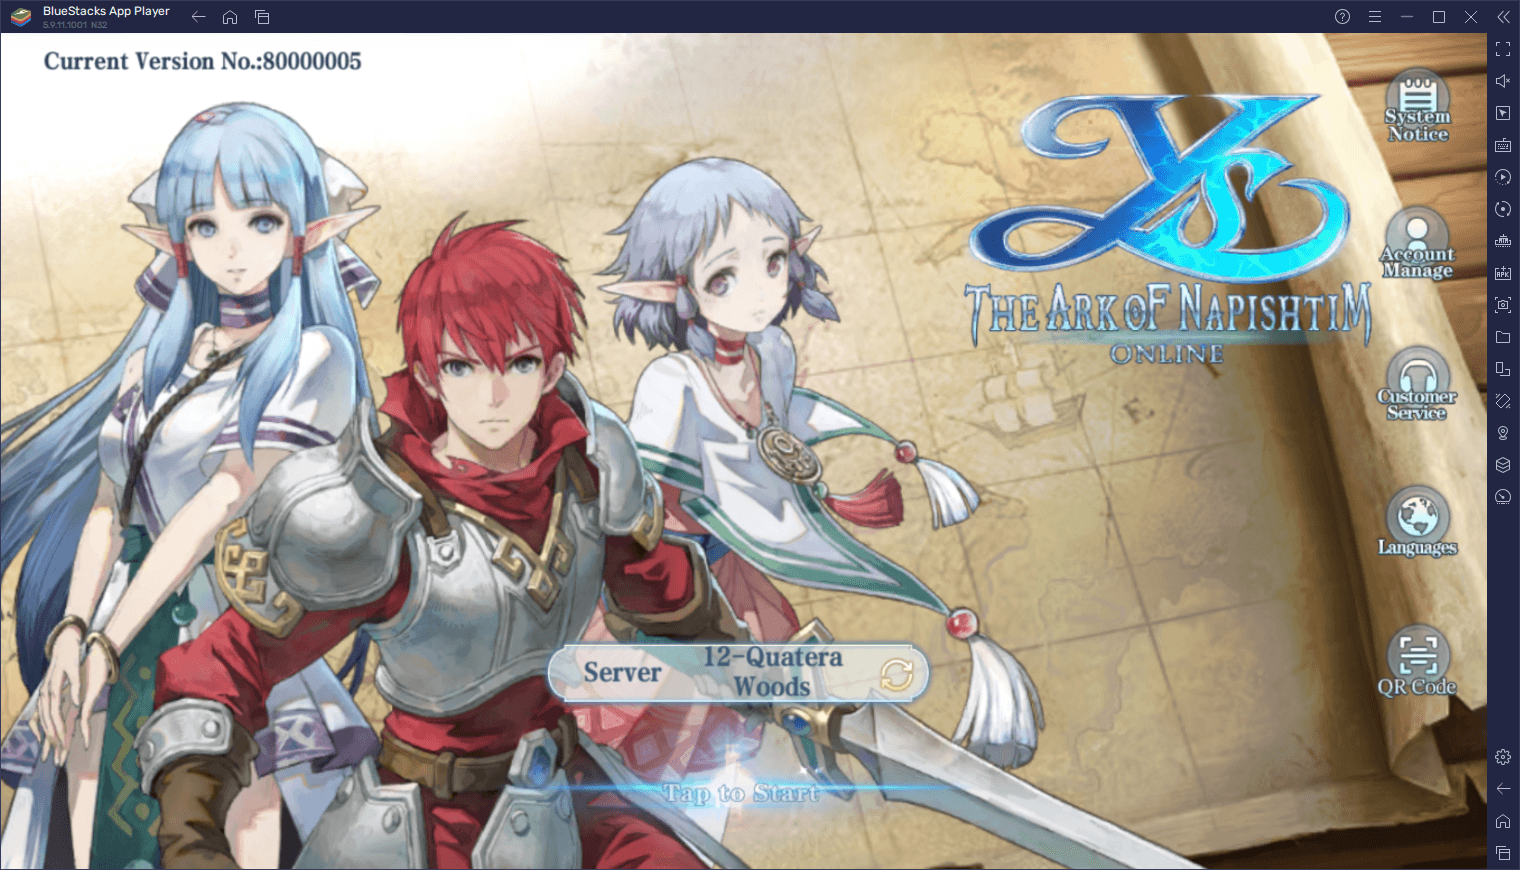 How to Get the Best Gameplay Experience with Ys Online: The Ark of Napishtim on PC Using Our BlueStacks Features and Tools